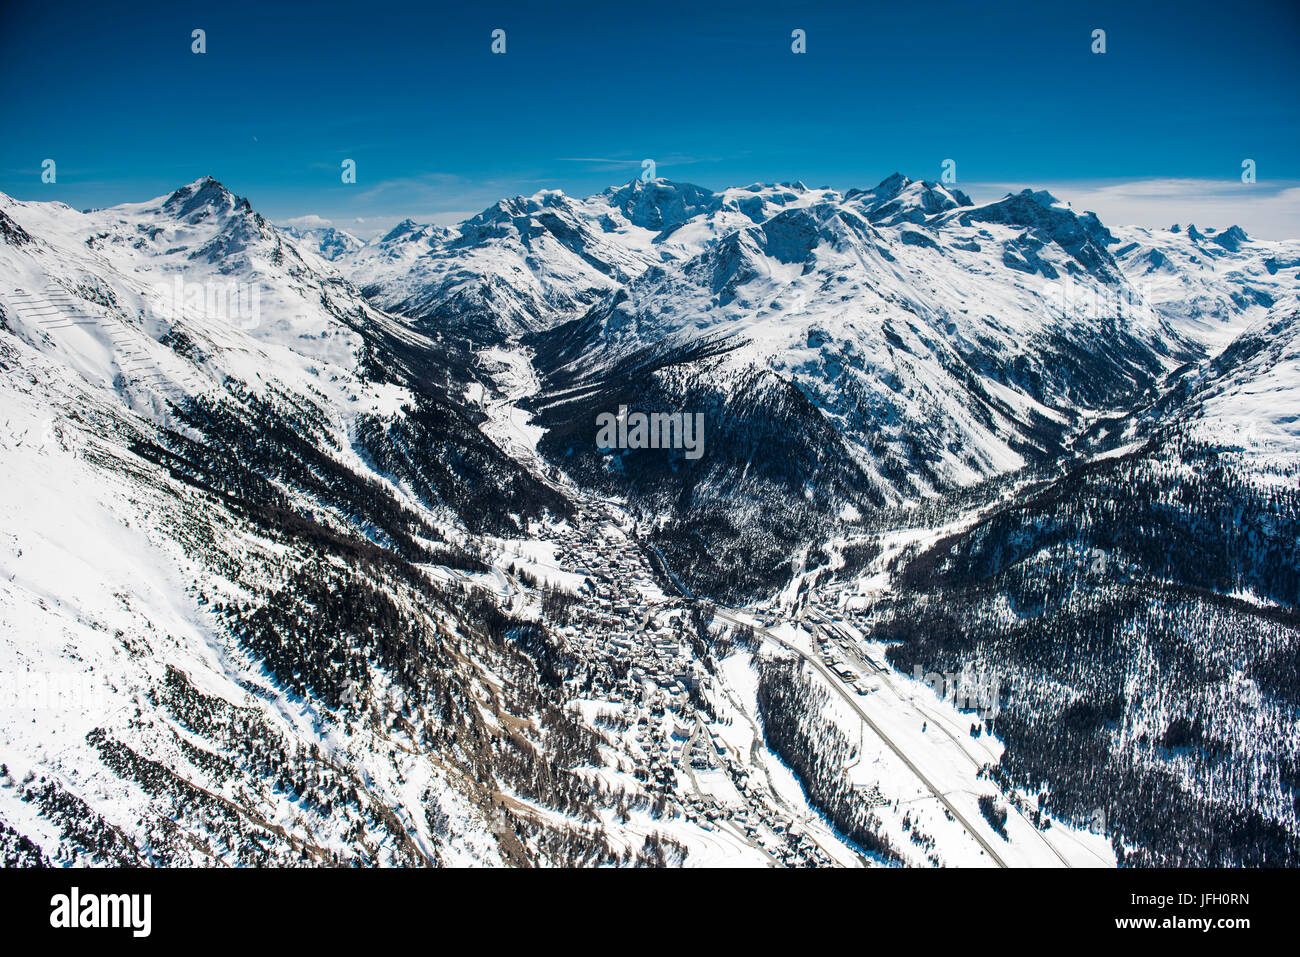 PontHarza with Berninagruppe and Val Roseg, aerial picture, Canton of Grisons, the Engadine, Switzerland Stock Photo